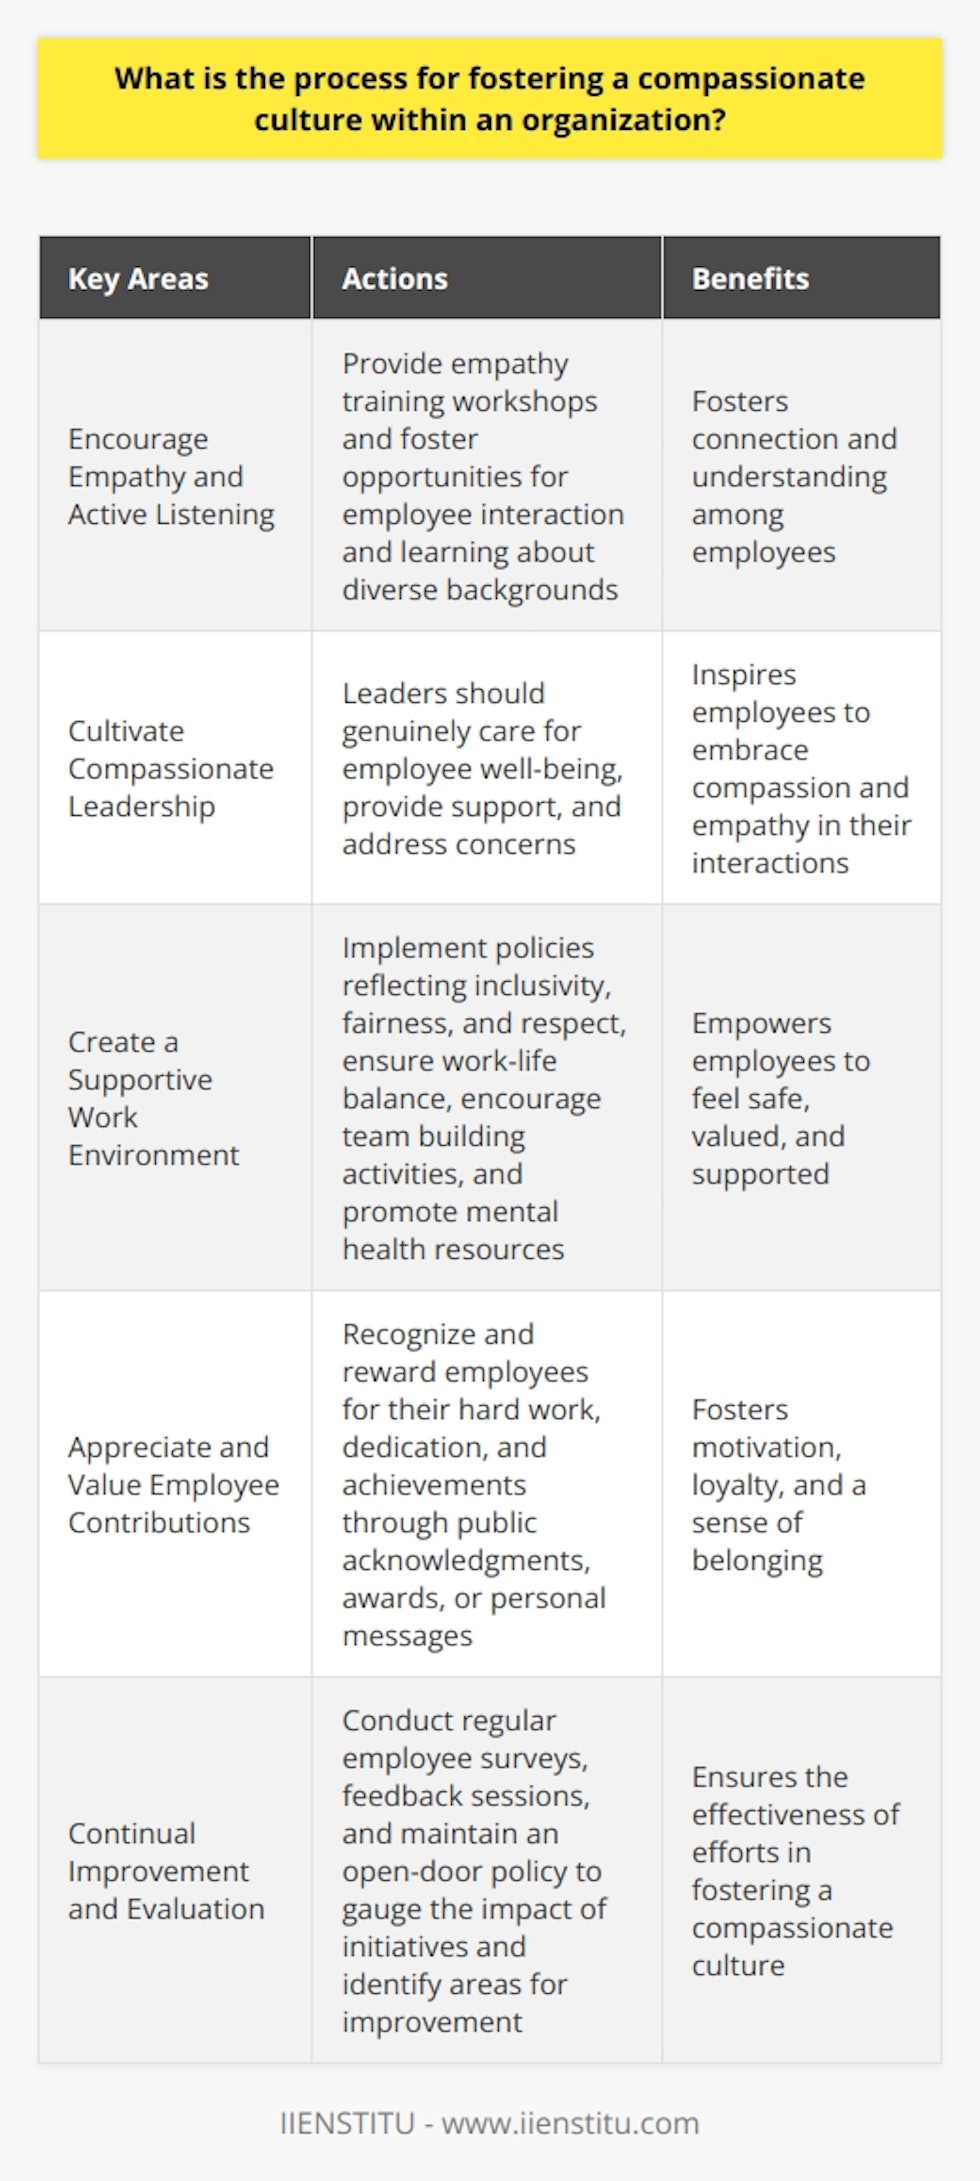 Fostering a compassionate culture within an organization is crucial for promoting a positive and harmonious workplace environment. Compassion involves understanding the suffering of others and actively working to alleviate it. To create a compassionate culture, organizations can focus on several key areas.First and foremost, it is important to encourage empathy and active listening among employees. Empathy allows individuals to understand and share the feelings of others, fostering a sense of connection and understanding. Organizations can facilitate empathy by providing training workshops and creating opportunities for employees to interact and learn about each other's diverse backgrounds and experiences. Active listening, which involves fully concentrating and understanding the speaker's message, should be emphasized as a crucial aspect of employee communication and company culture.Leaders play a vital role in cultivating a compassionate culture within the organization. They should serve as role models by genuinely caring for the well-being of their employees, providing support, and addressing any concerns that arise. By exhibiting compassion and empathy, leaders inspire the rest of the team to embrace these qualities in their interactions with coworkers.Creating a supportive work environment is also essential for fostering compassion. This includes implementing policies and structures that reflect inclusivity, fairness, and respect for all employees. It is important to ensure a proper work-life balance, encourage team building activities, and promote mental health resources. By creating an environment where employees feel safe, valued, and supported, organizations can foster compassion and encourage employees to thrive.Appreciating and valuing employee contributions is another key aspect of fostering a compassionate culture. Recognizing and rewarding employees for their hard work, dedication, and achievements can be done through various means, such as public acknowledgments, awards, or personal messages. This fosters motivation, loyalty, and a sense of belonging among employees, reinforcing the culture of compassion within the organization.Continual improvement and evaluation are necessary to ensure the effectiveness of efforts in fostering a compassionate culture. Regular employee surveys, feedback sessions, and maintaining an open-door policy for communication regarding company culture can help gauge the impact of initiatives and identify areas for improvement. By consistently evaluating and striving for growth, organizations can create a more compassionate workplace.In conclusion, fostering a compassionate culture within an organization requires understanding compassion, encouraging empathy and active listening, strong leadership, creating a supportive environment, appreciating employee contributions, and continuous improvement and evaluation. By prioritizing these aspects, organizations can cultivate a work environment that not only benefits employee well-being and satisfaction but also positively impacts overall company performance.